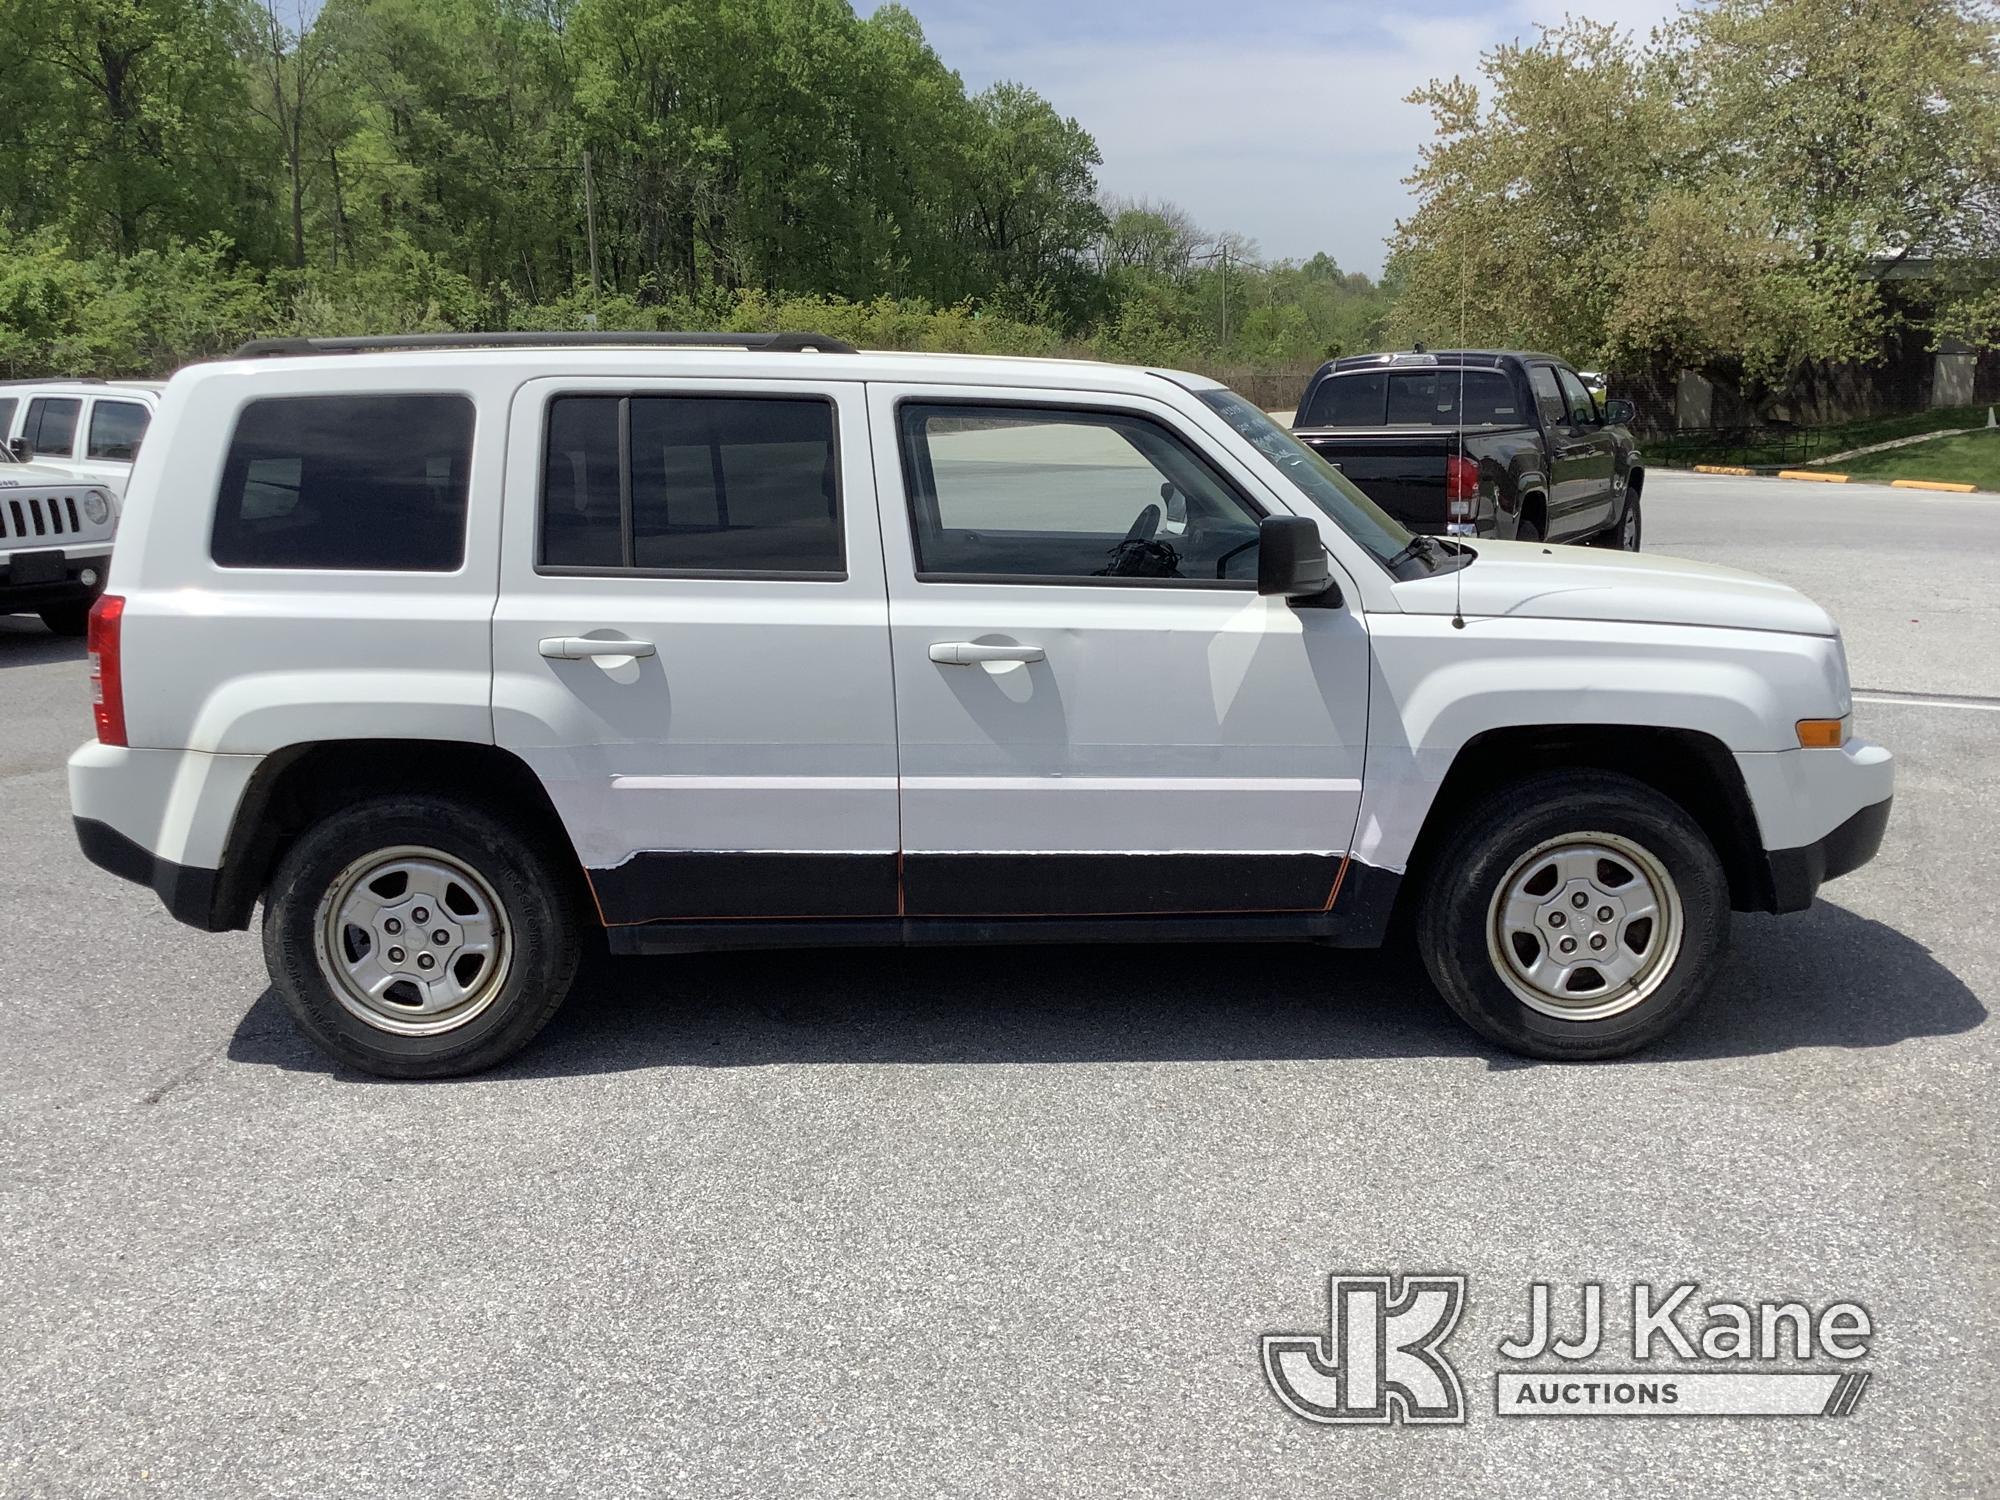 (Chester Springs, PA) 2014 Jeep Patriot 4x4 4-Door Sport Utility Vehicle Runs & Moves, Low Fuel, Bod